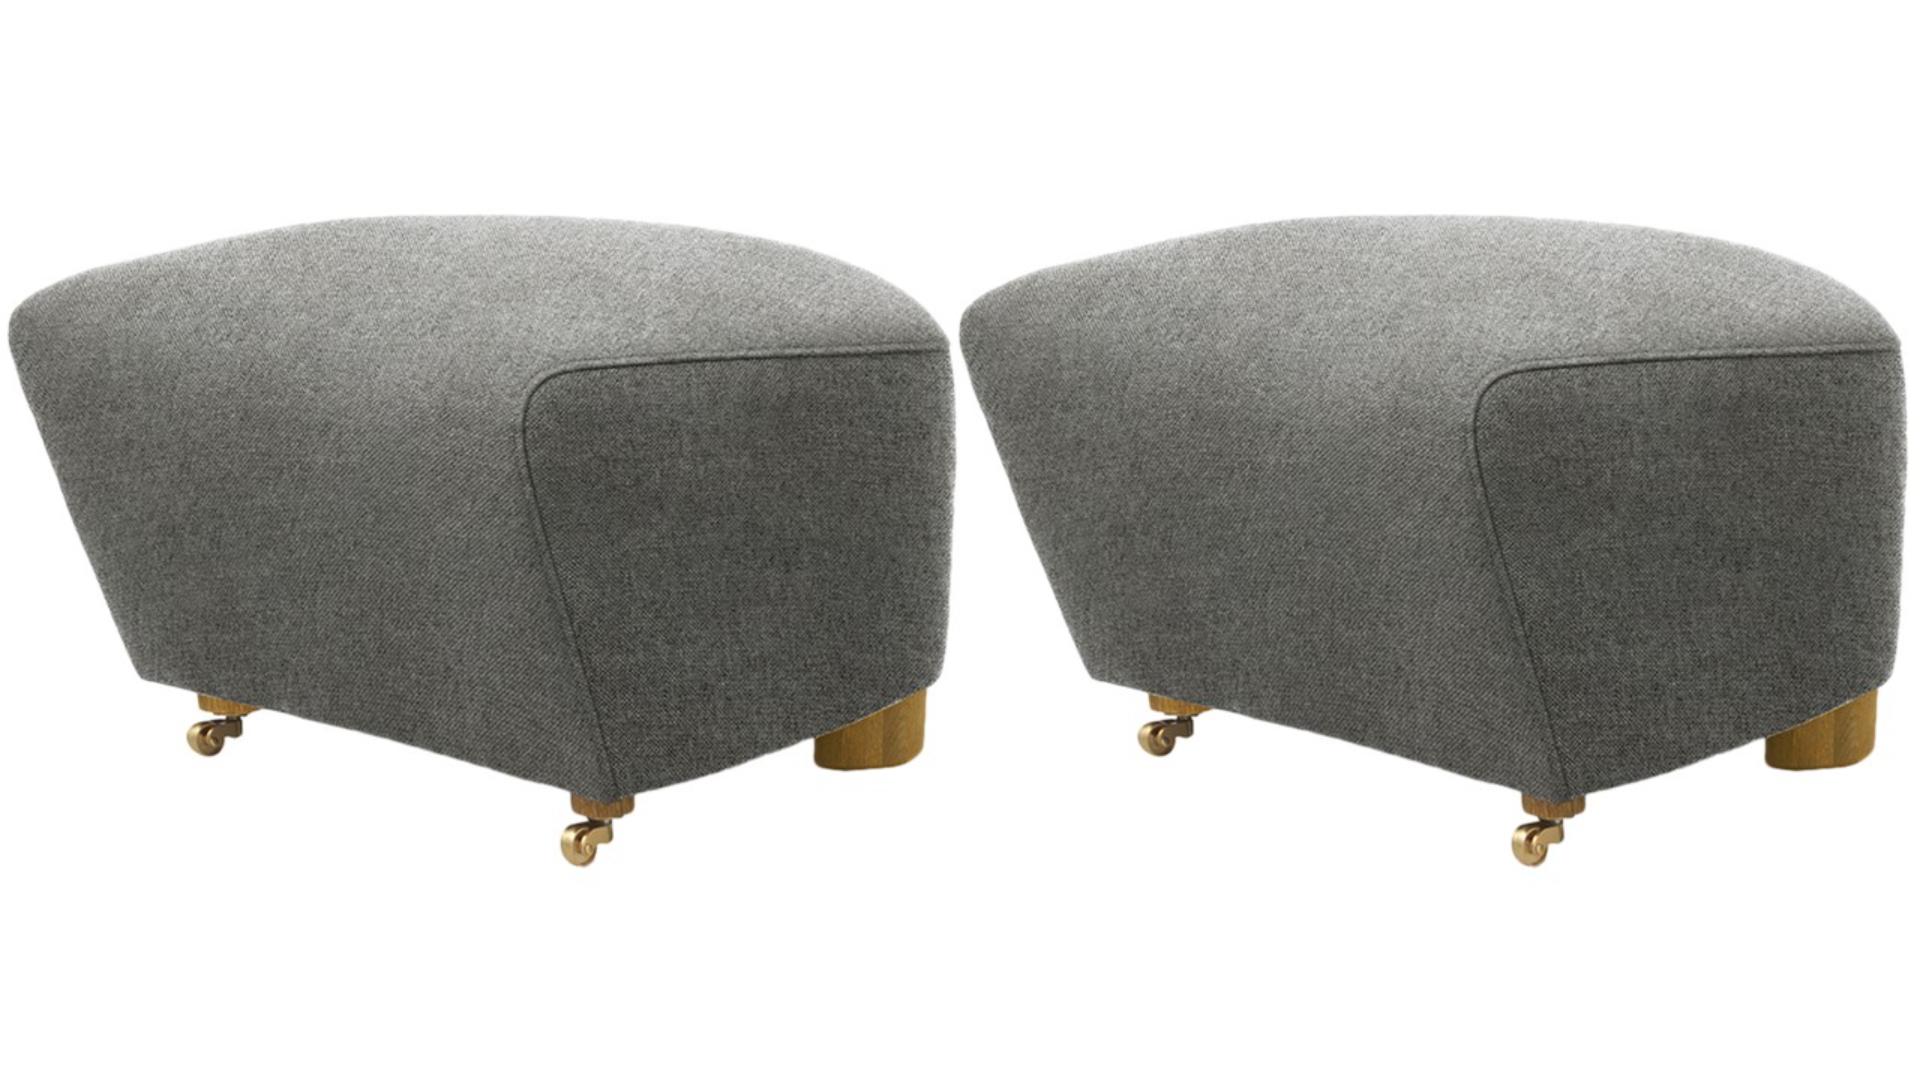 Set of 2 grey natural oak Hallingdal the tired man footstools by Lassen
Dimensions: W 55 x D 53 x H 36 cm 
Materials: Textile

Flemming Lassen designed the overstuffed easy chair, The Tired Man, for The Copenhagen Cabinetmakers’ Guild